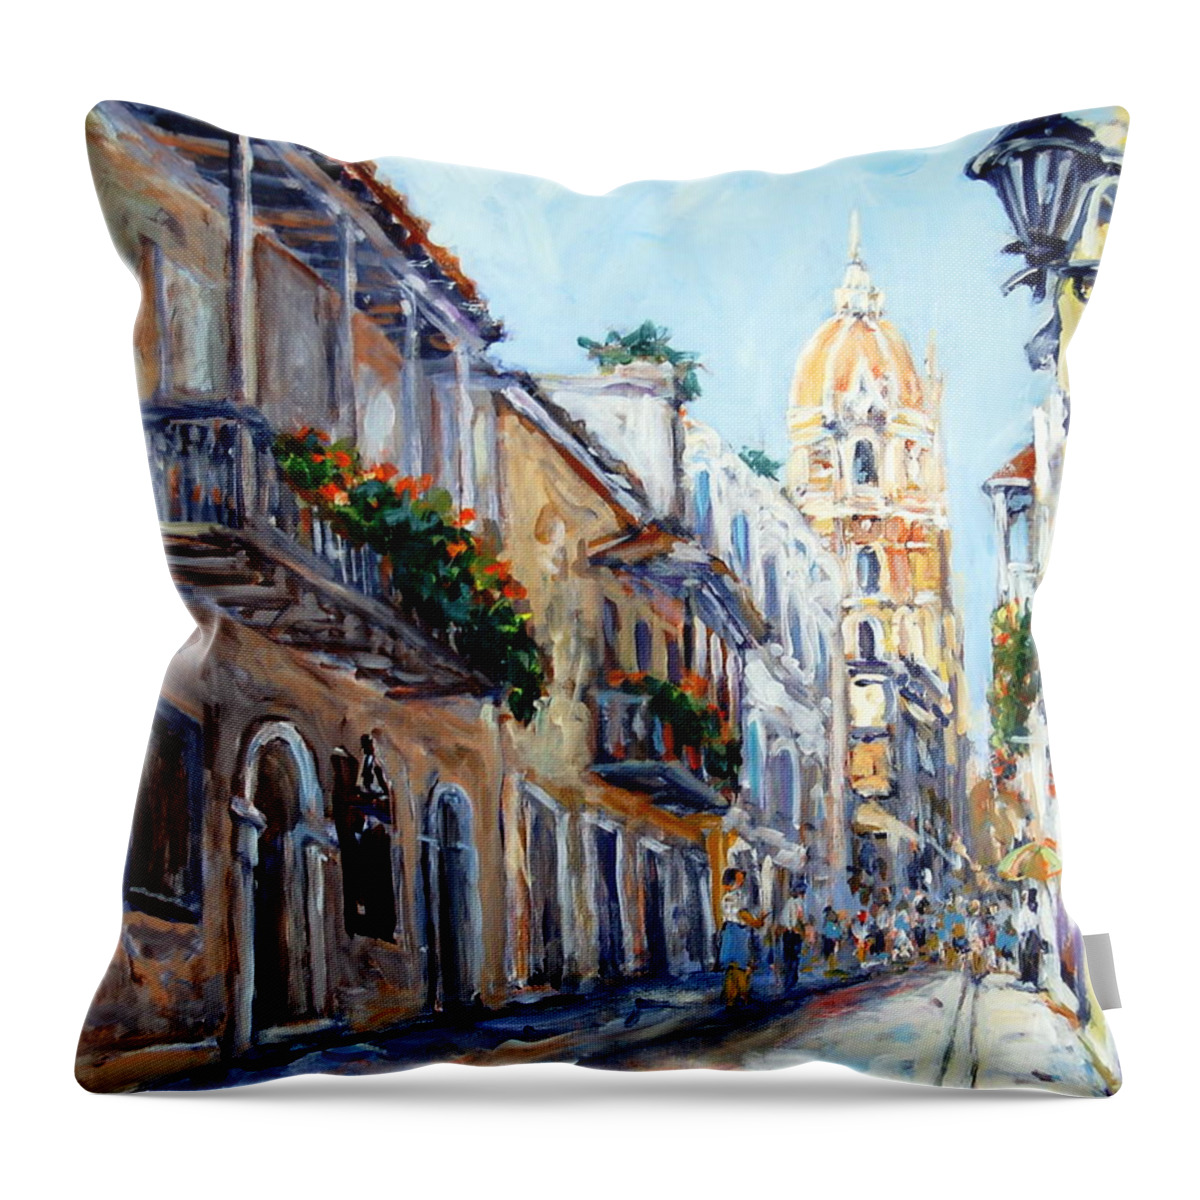 Cityscape Throw Pillow featuring the painting Cartagena Colombia by Ingrid Dohm